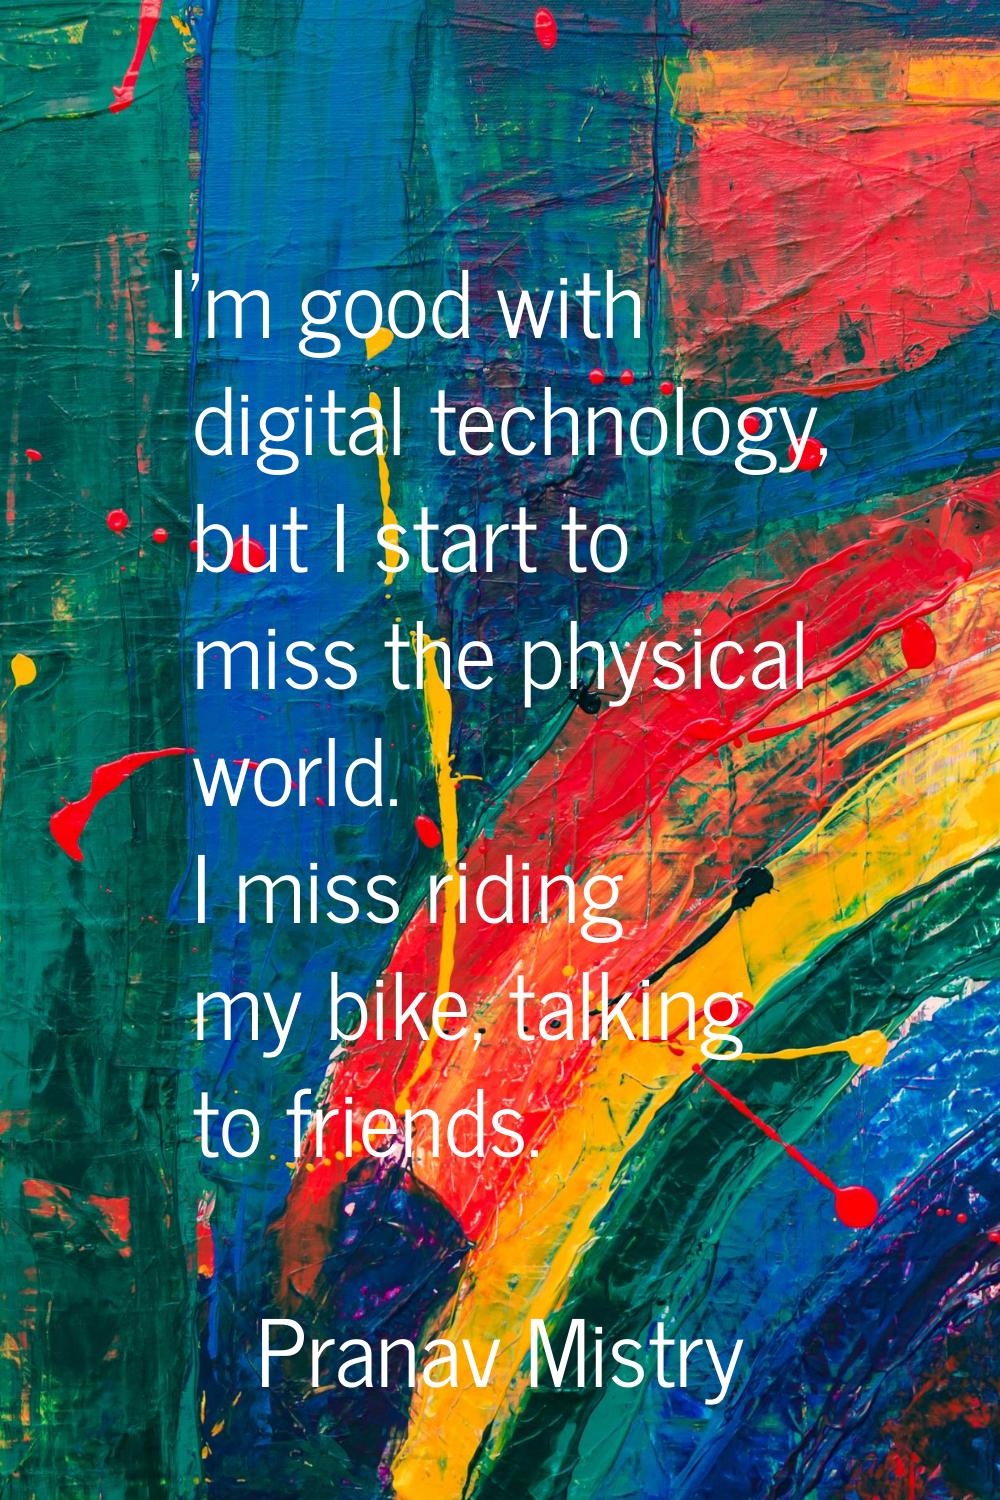 I'm good with digital technology, but I start to miss the physical world. I miss riding my bike, ta